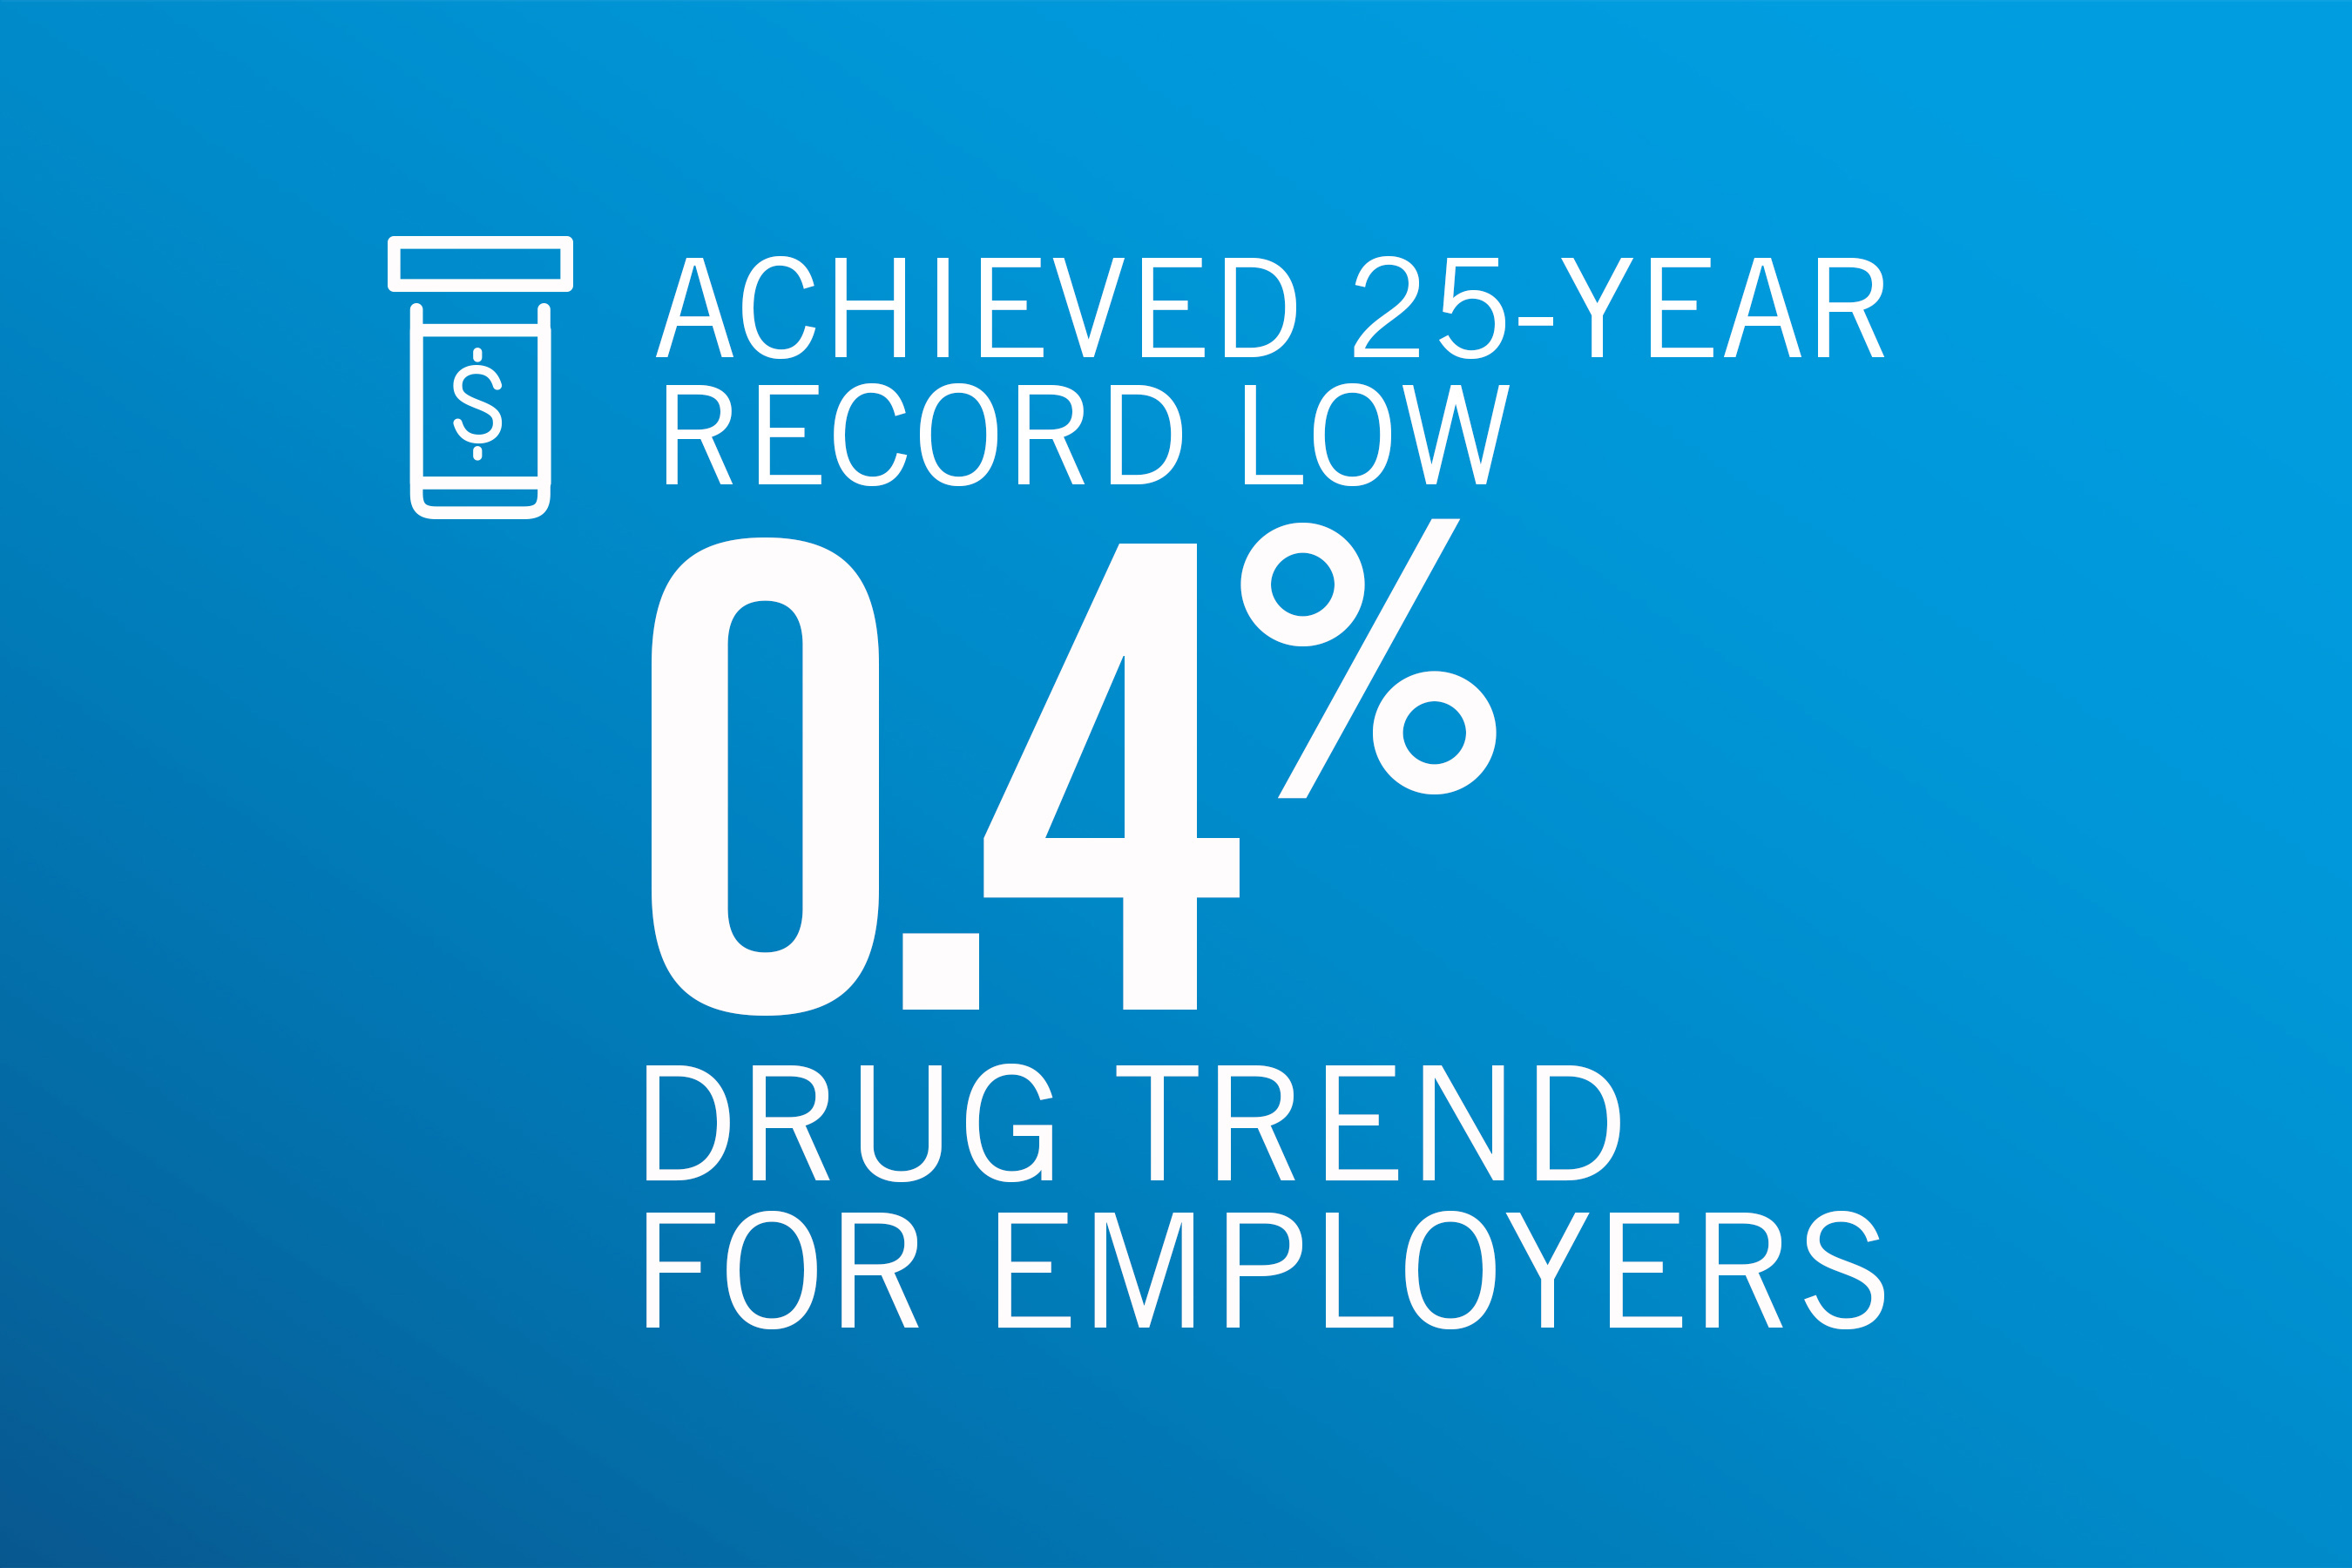 Lower drug prices, greater use of lower-net-cost treatments, and improved health outcomes helped keep annual drug spending relatively flat for employer-sponsored plans 2018.